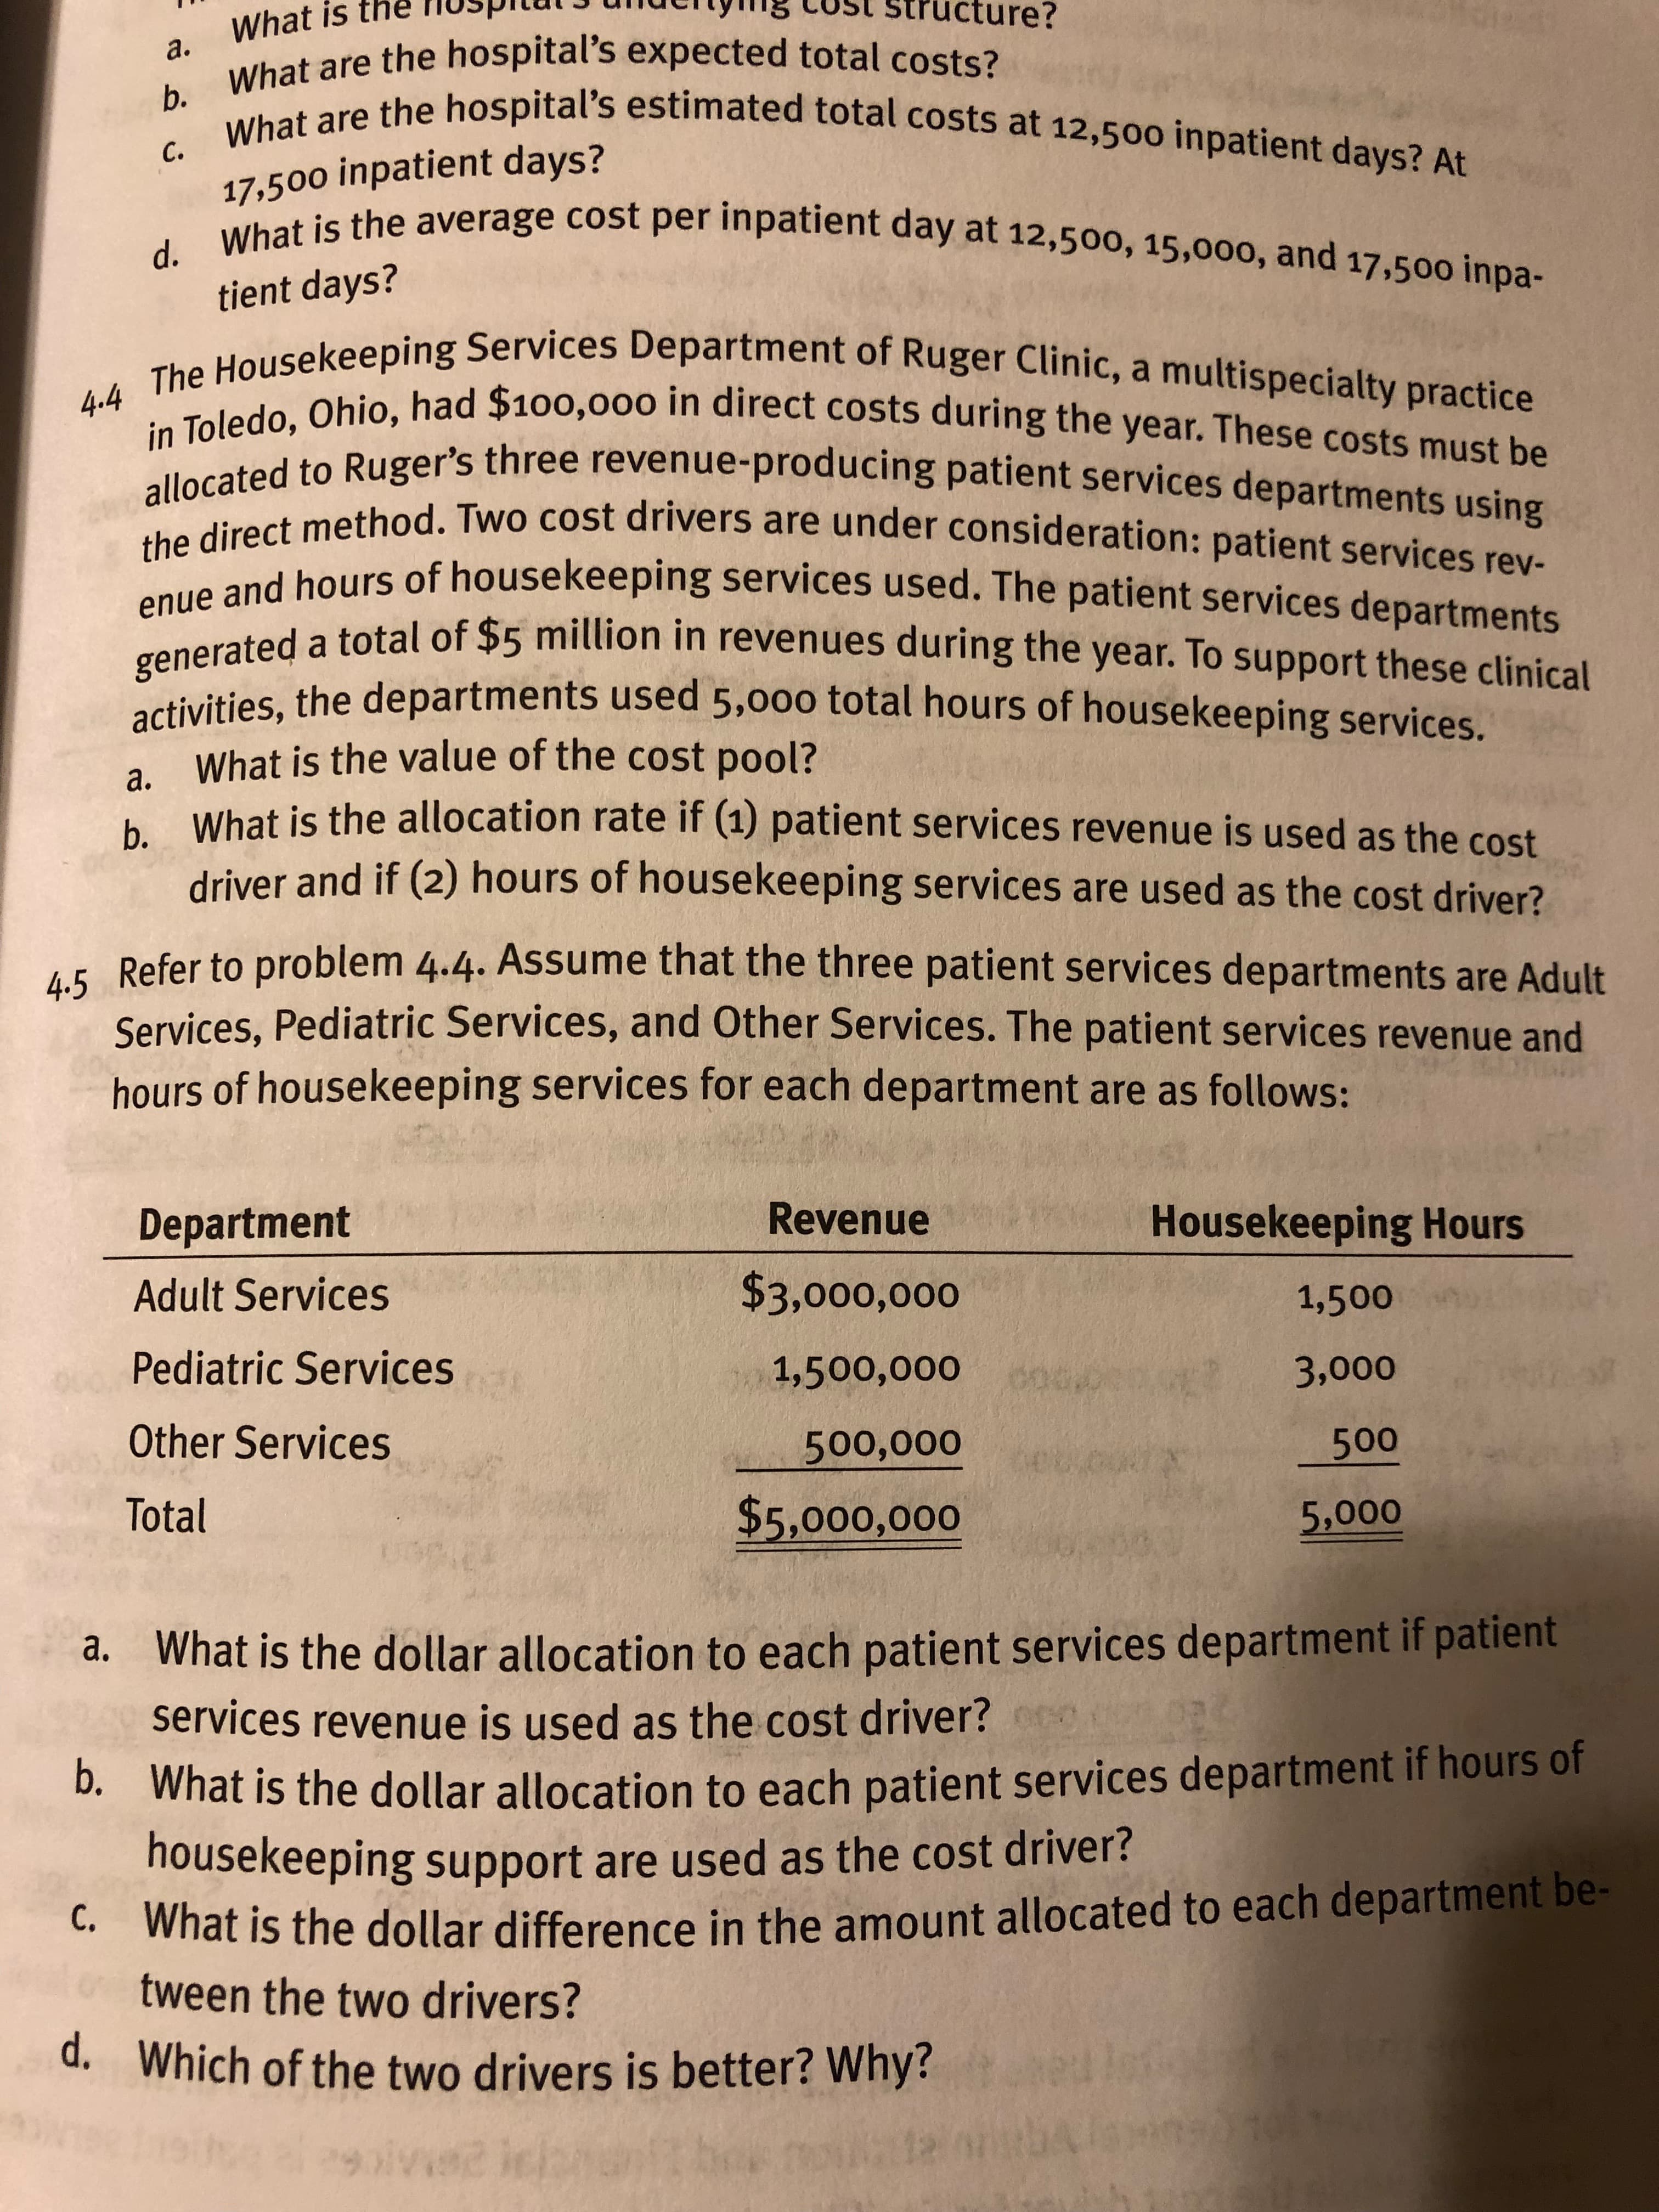 What
is
thestructure?
t are the hospital's expected total costs?
17,50o inpatient days?
tient days?
b. Wha
C. What are the hospital's
s estimated total costs at 12,500 inpatient days? At
e average cost per inpatient day at 12,500, 15,000, and 17.500 inpa
ing Services Department of Ruger Clinic, a multispecialty practice
hio, had $100,ooo in direct costs during the year. These costs must be
Ruger's three revenue-producing patient services departments using
thod. Two cost drivers are under consideration: patient services rev
rs of housekeeping services used. The patient services departments
total of $5 million in revenues during the year. To support these clinical
4.4 The Housekeeping
Toledo, Ohio, h
the direct
and hou
enue and hours
rated a
e departments used 5,o00 total hours of housekeeping services.
activities, the
a. What is the value of the cost pool?
What is the allocation rate
b.
if (u) patient services revenue is used as the cost
driver and if (2) hours of housekeeping services are used as the cost driver?
Refer to problem 4.4. Assume that the three patient services departments are Adult
Services, Pediatric Services, and Other Services. The patient services revenue and
hours of housekeeping services for each department are as follows:
Department
Adult Services
Pediatric Services
Other Services
Total
Revenue
$3,000,000o
1,500,000
Housekeeping Hours
1,500
3,000
500
500,000
$5,000,000o
ООО
What is the dollar allocation to each patient services department if pati
a.
D. What is the dollar allocation to each patient services department if
c. What is the differern
d. Which of the two drivers is better? Why?
services revenue is used as the cost driver?
housekeeping support are used as the cost driver?
tween the two drivers?
t is th
e dollar difference in the amount allocated to each department be
